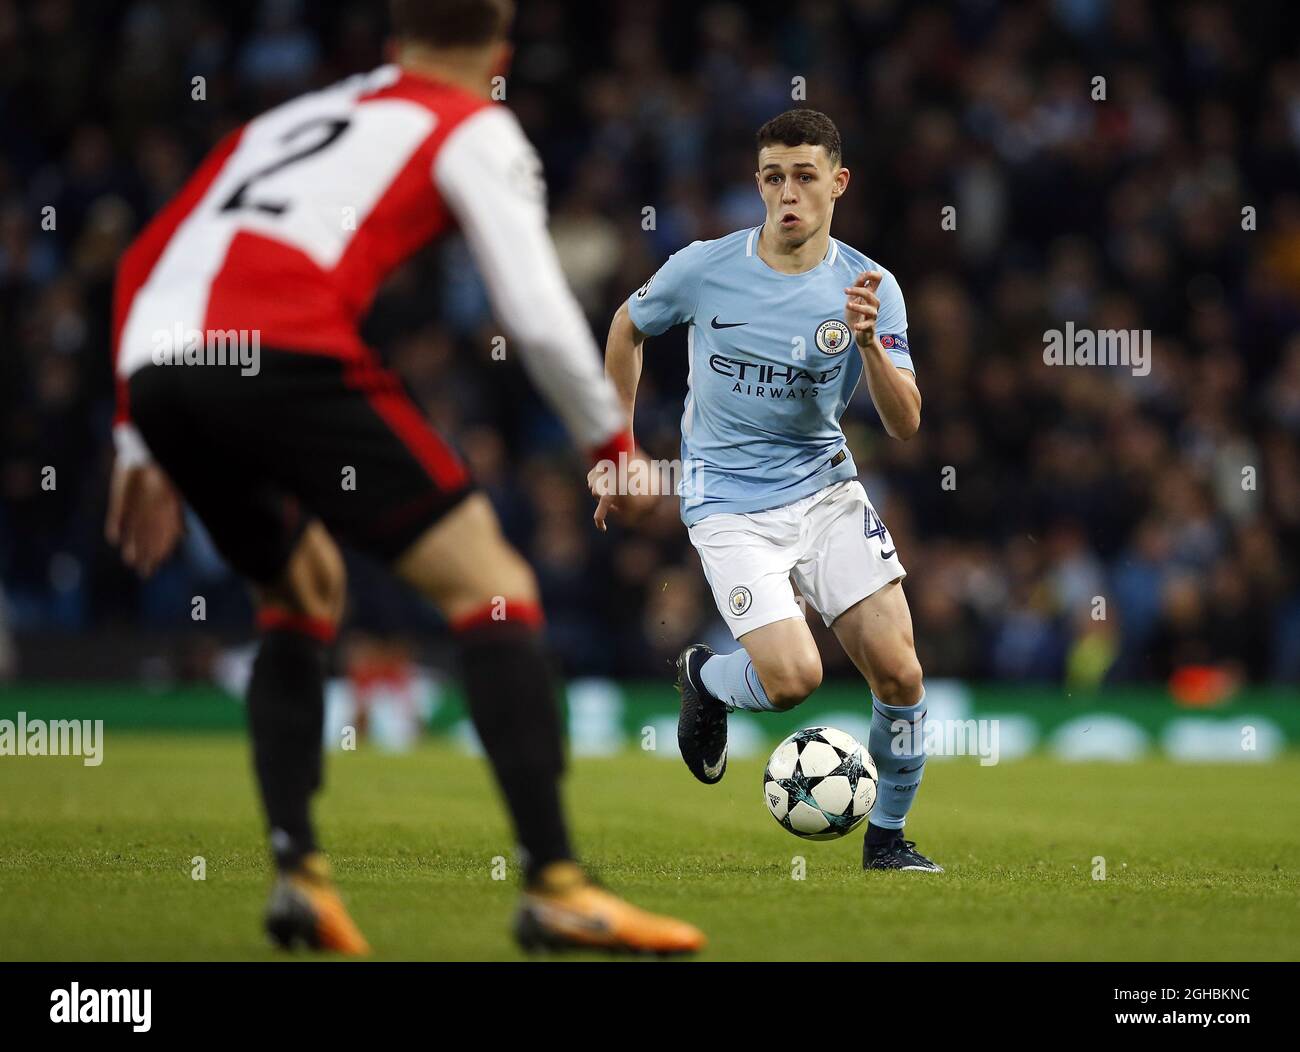 Manchester City's Phil Foden in action during the champions league match at the Etihad Stadium, Manchester. Picture date: 21st November 2017. Picture credit should read: Andrew Yates/Sportimage via PA Images Stock Photo